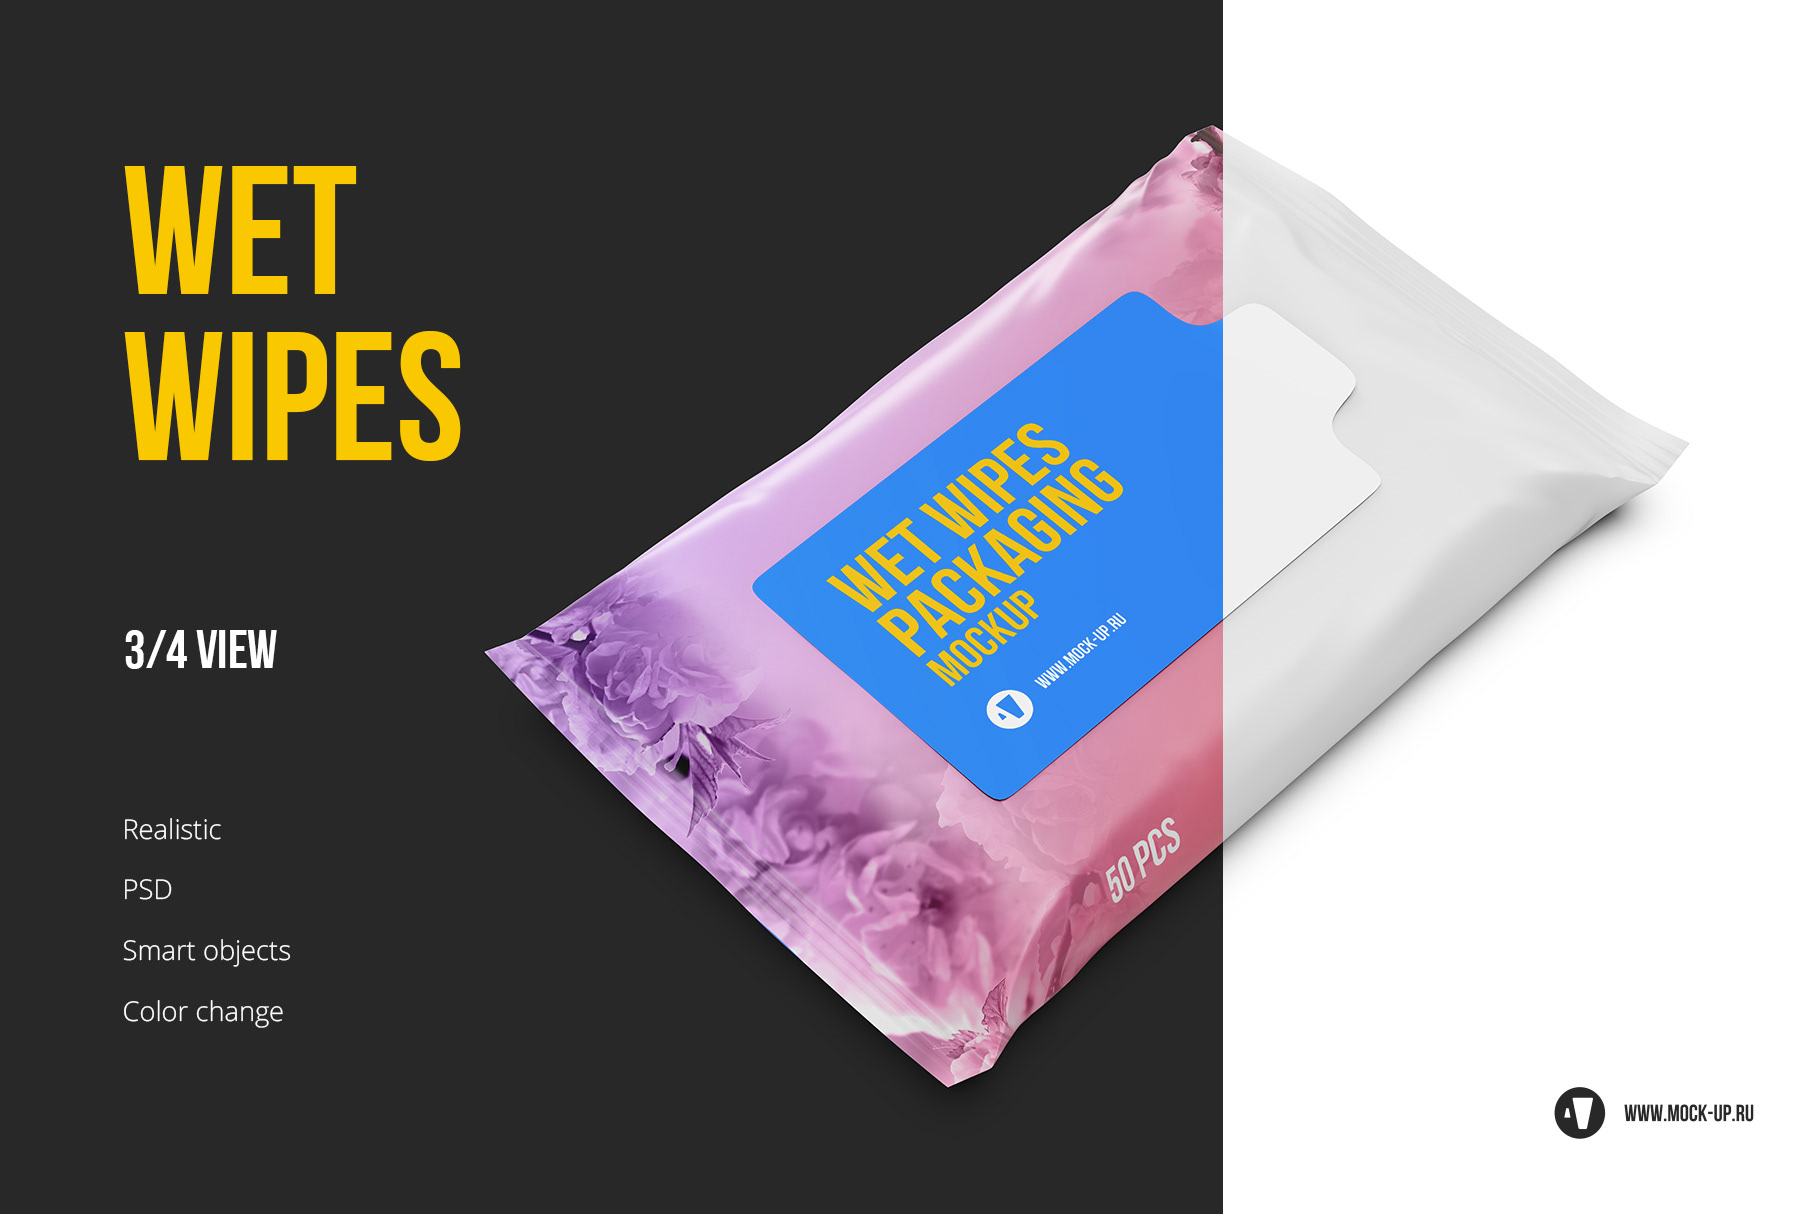 Download Exclusive Product Mockups Wet Wipes 3 4 View Mockup PSD Mockup Templates